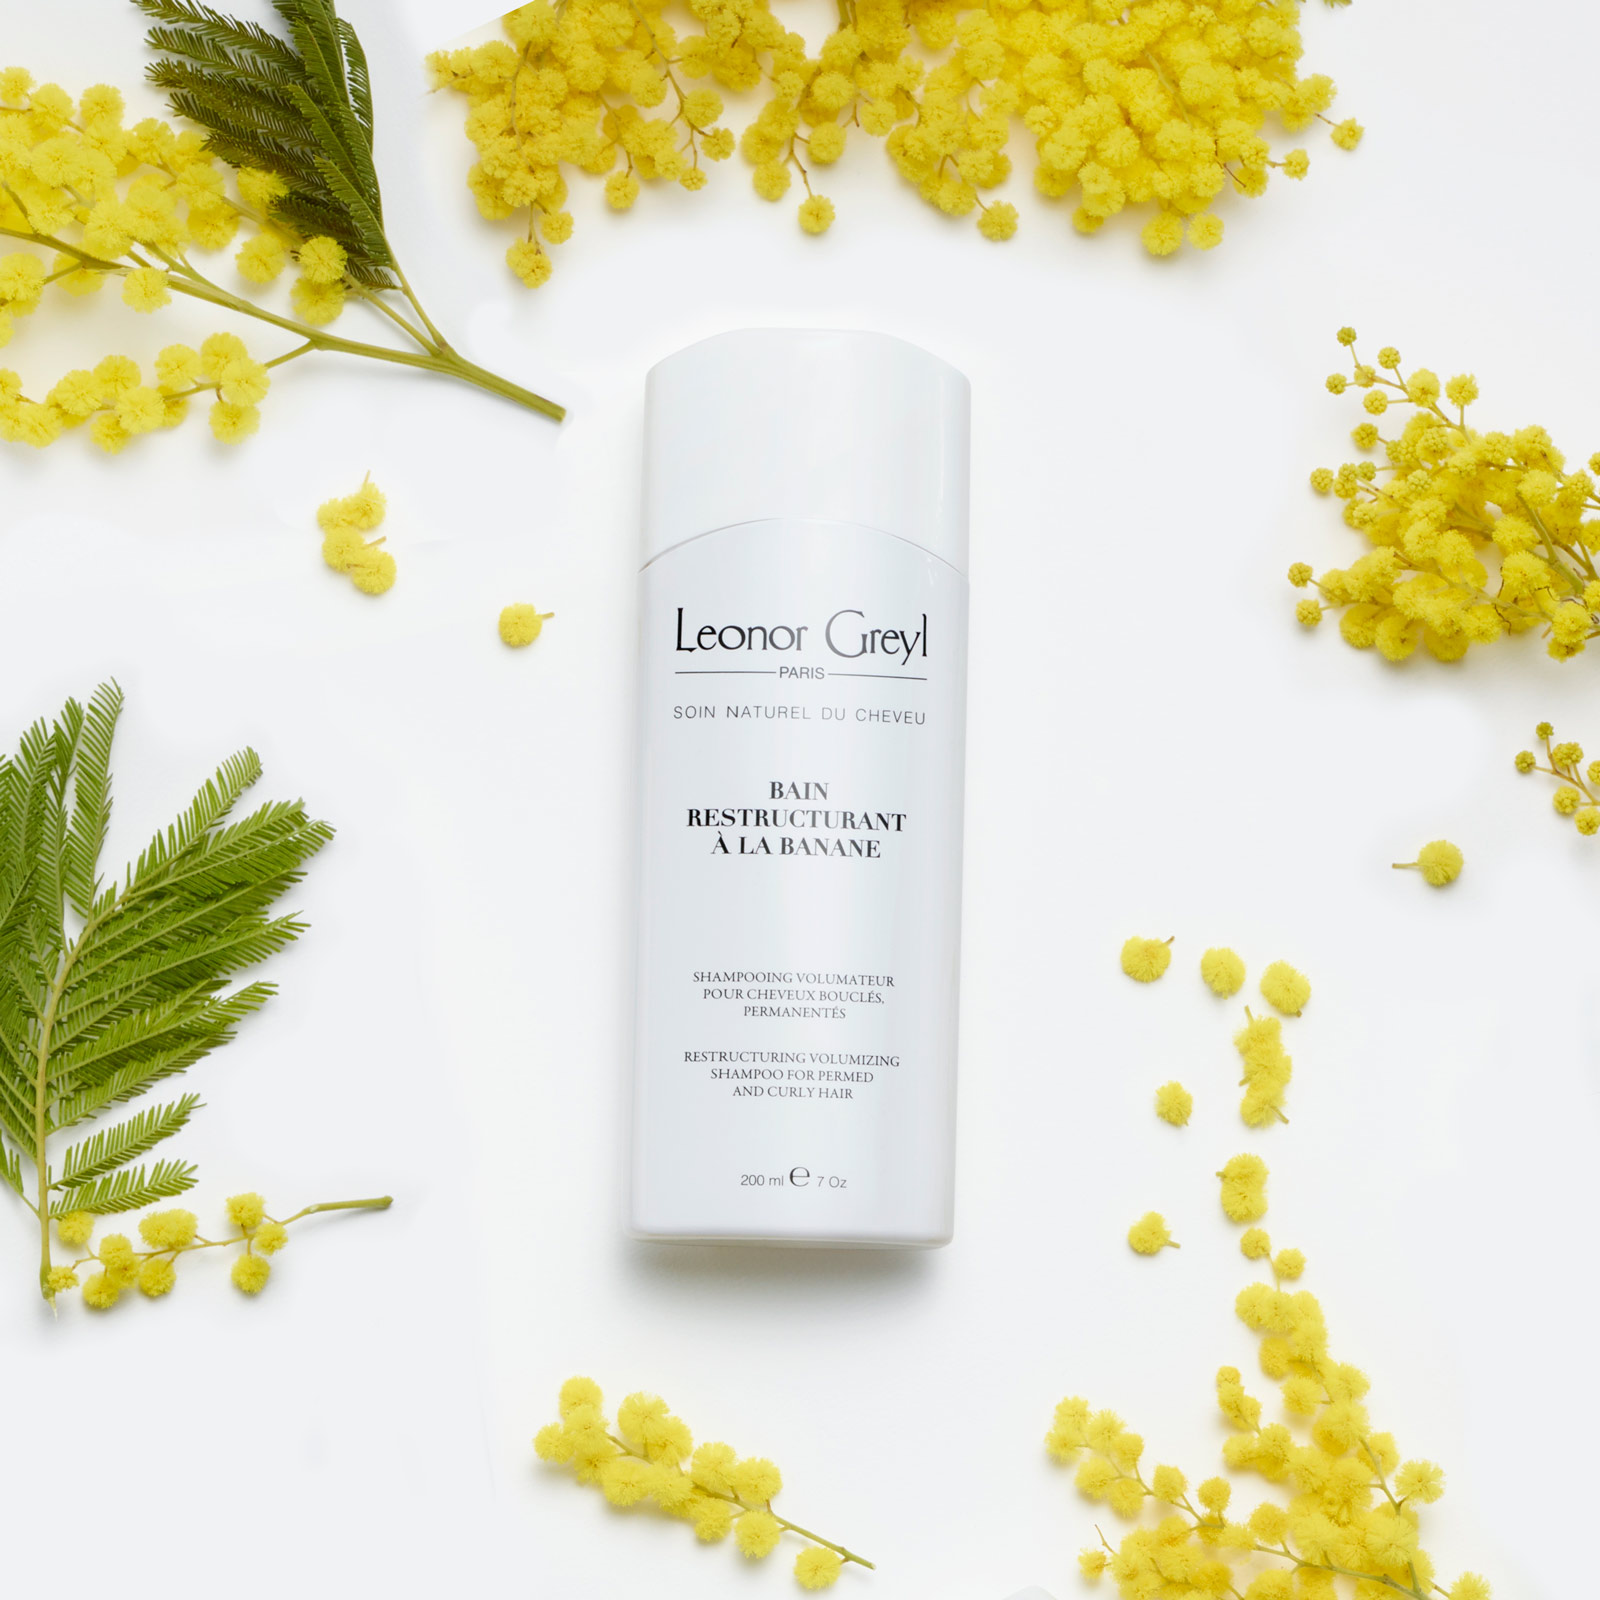 bain restructurant a la banane by leonor greyl with floral natural ingredients